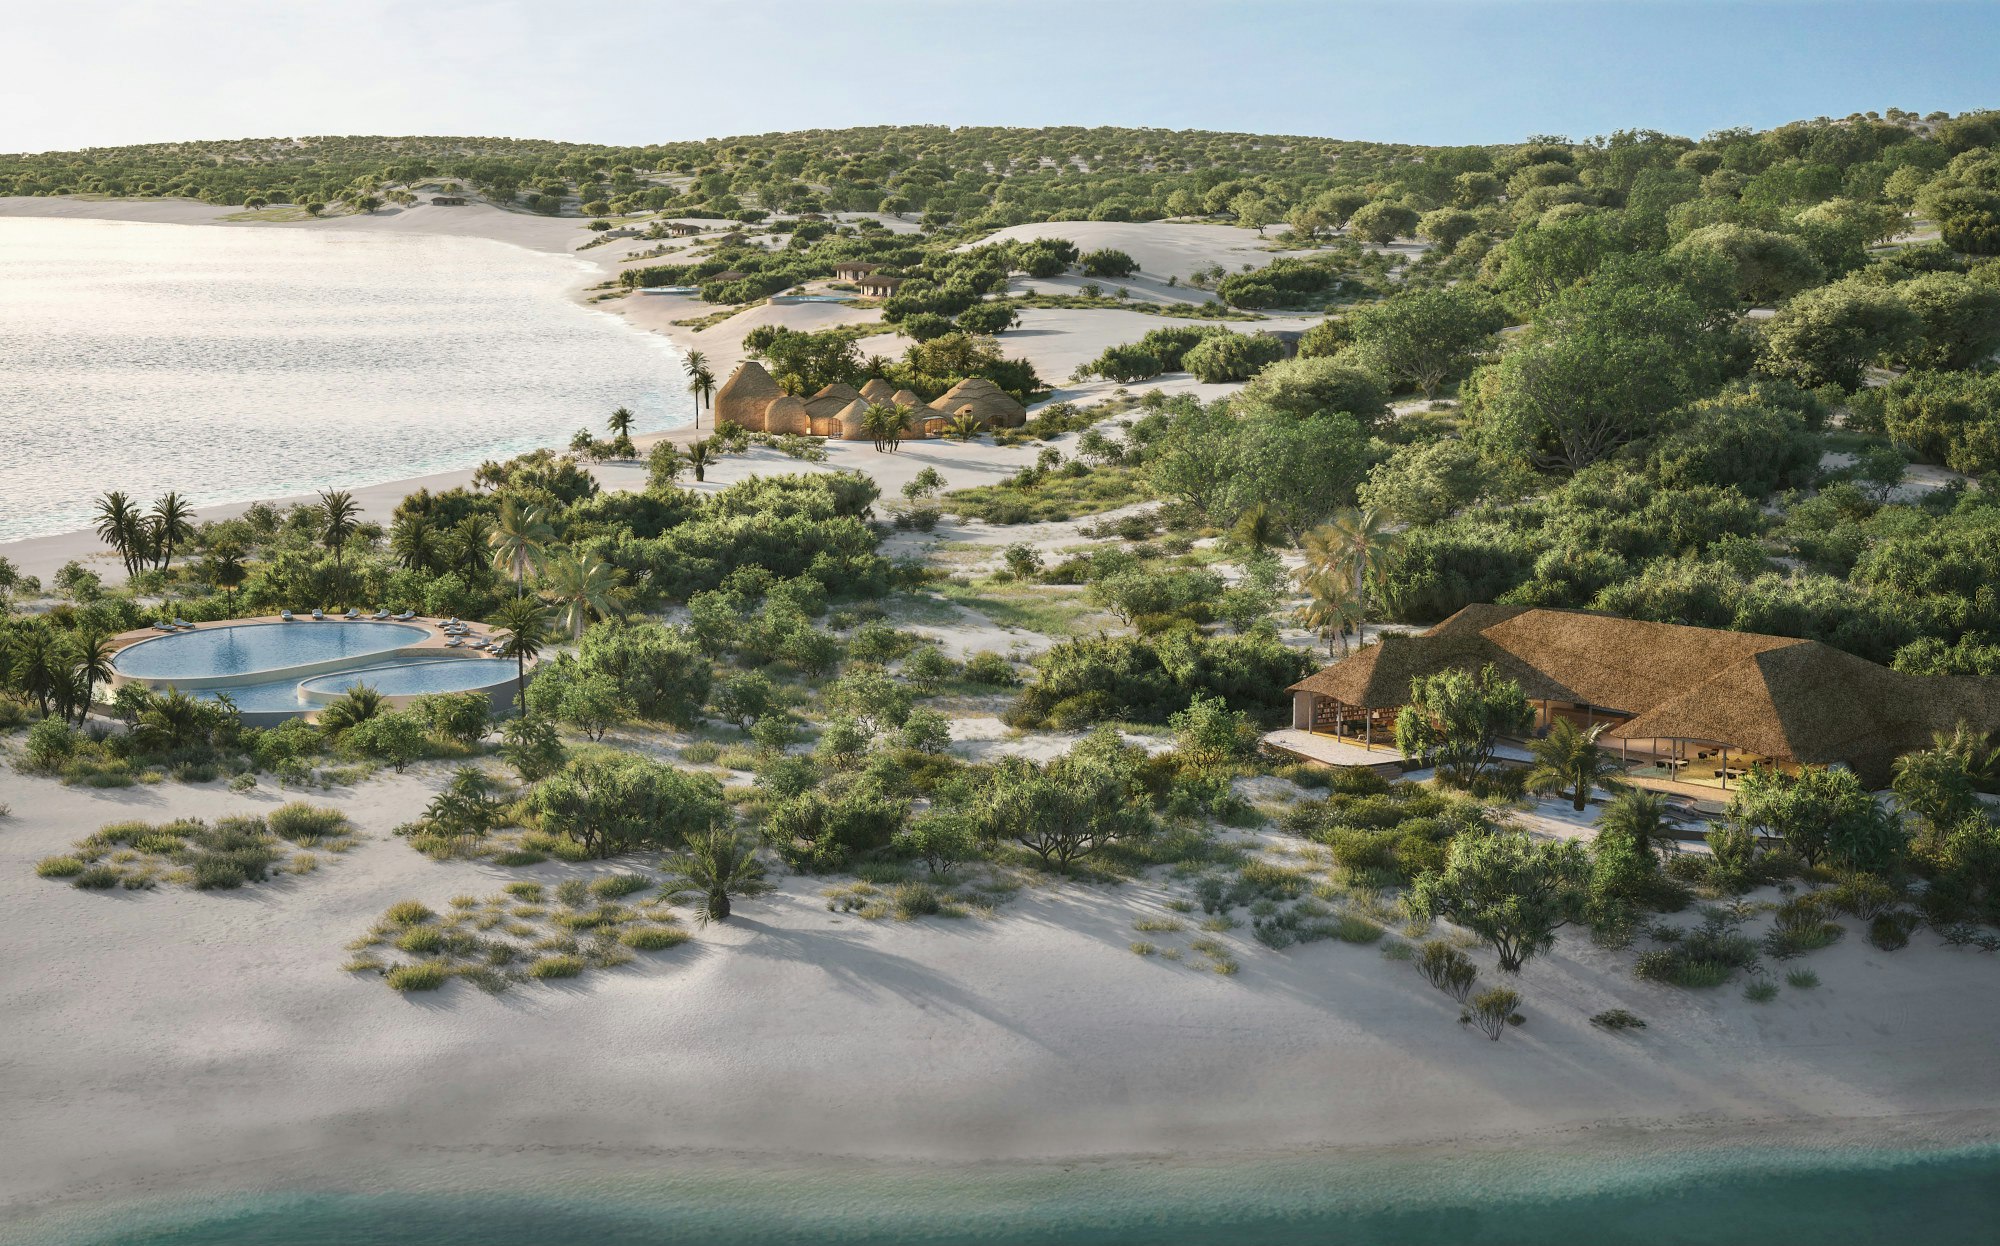 Rendering of a 3D printed island resort off the coast of Mozambique